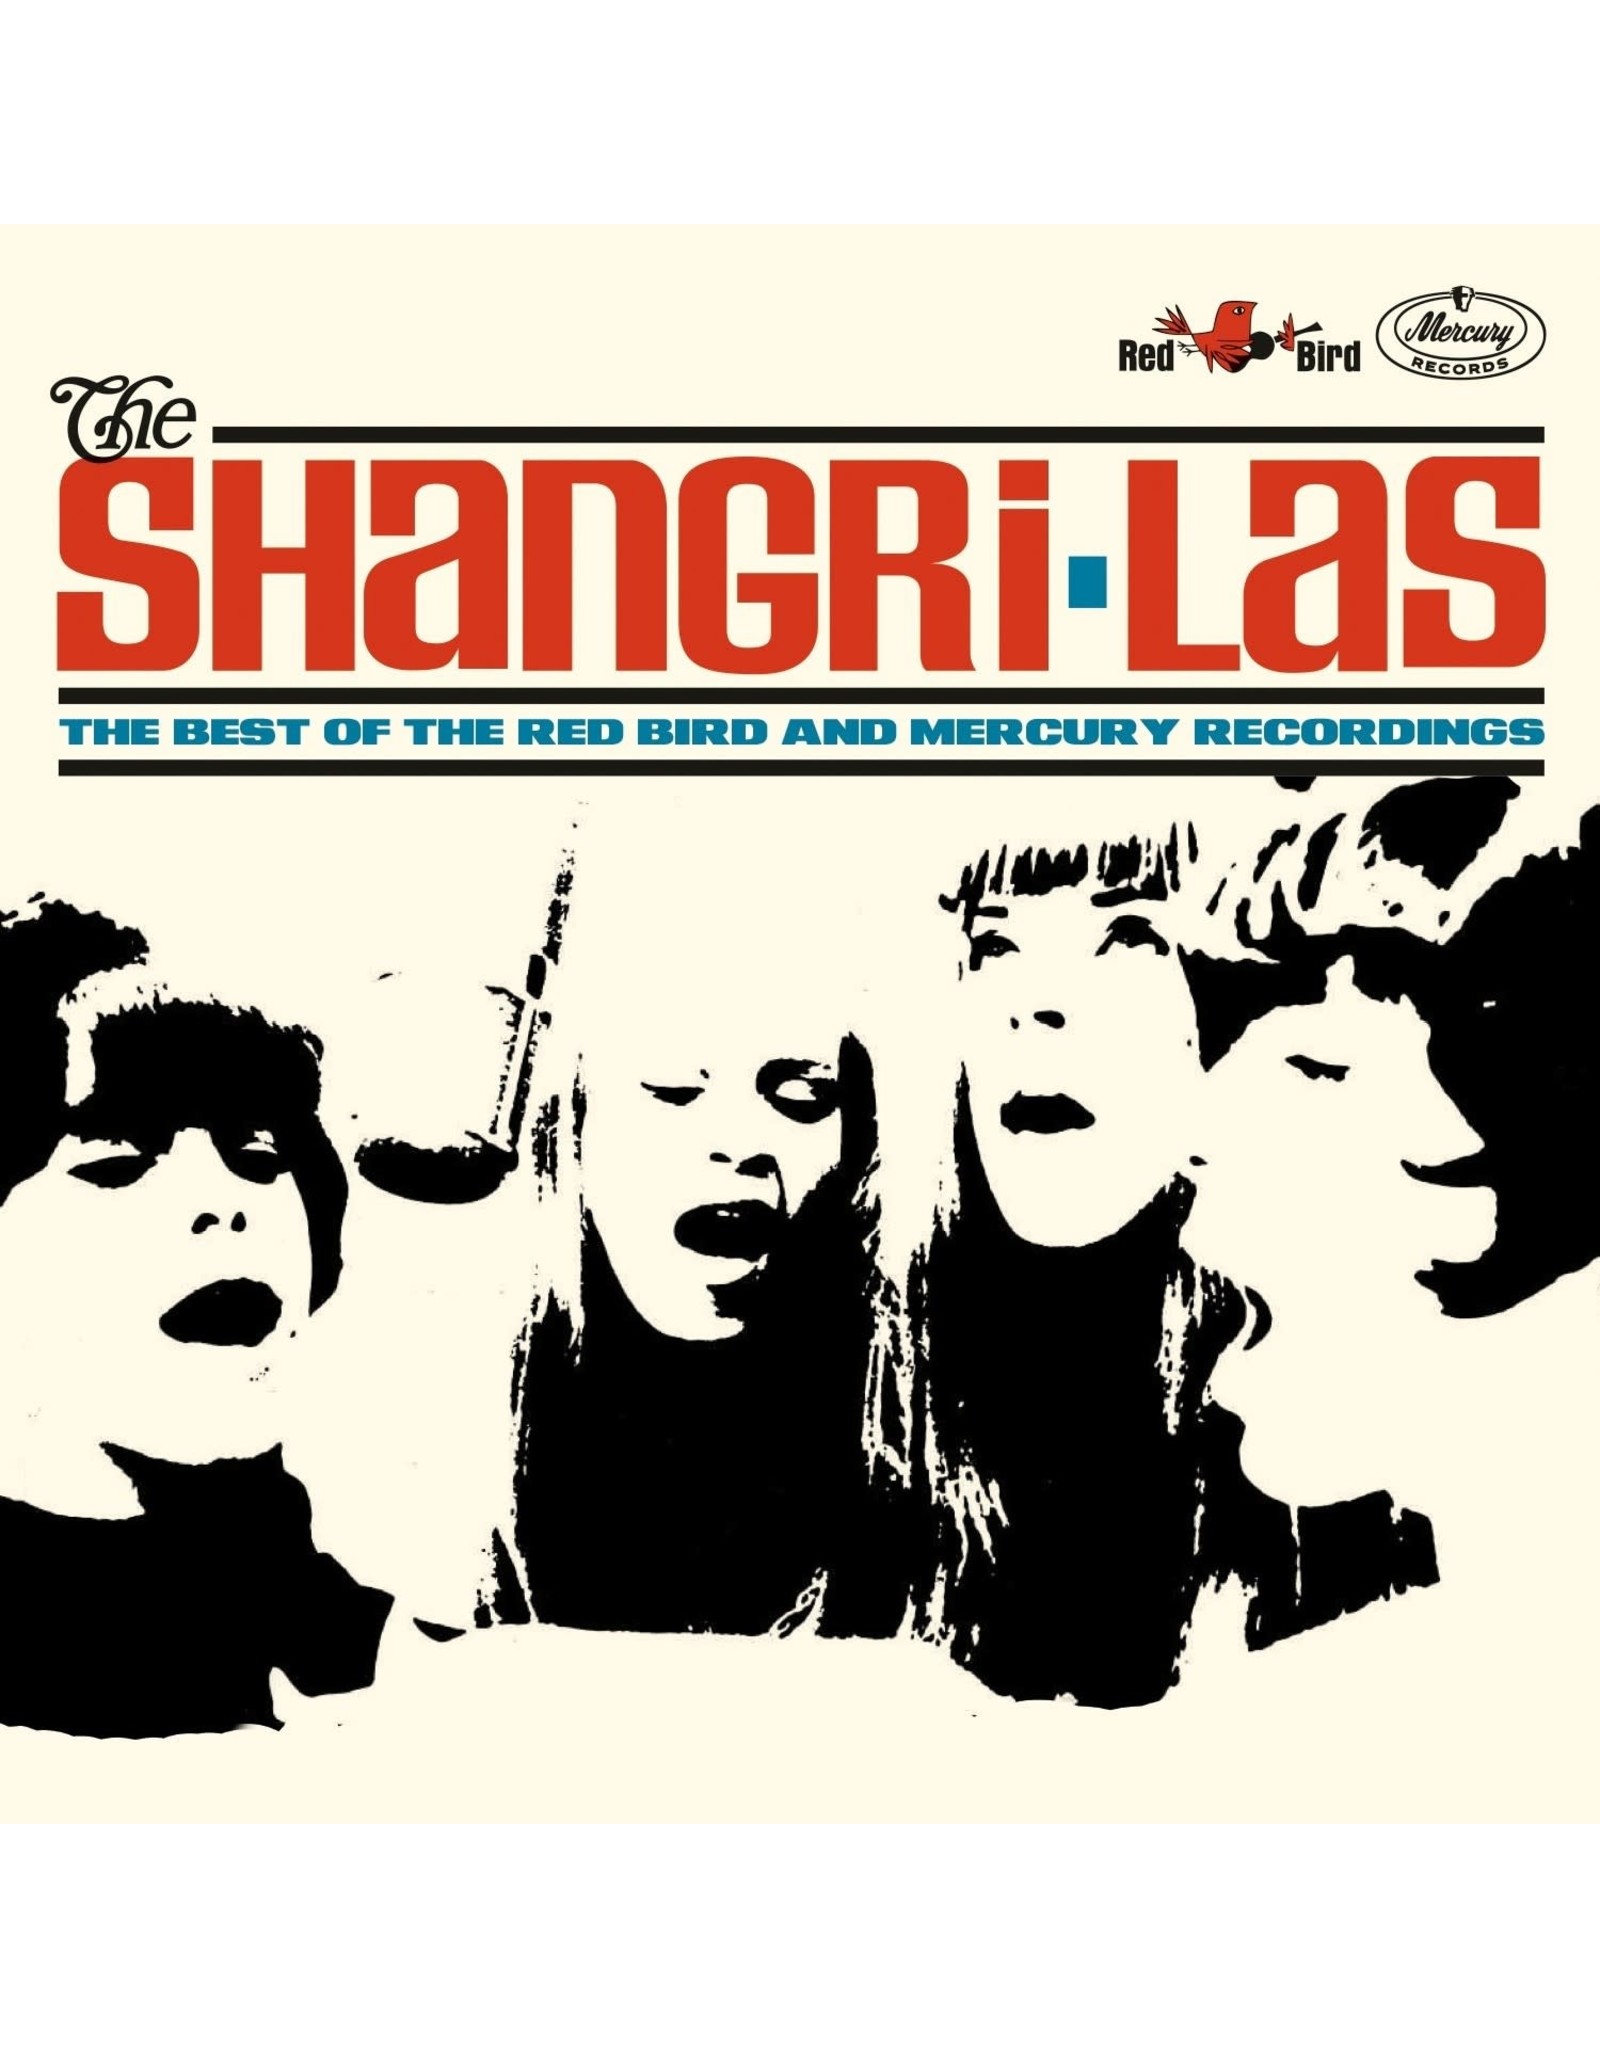 Shangri-Las - The Best of the Red Bird and Mercury Recordings 2LP (BF RSD 21' Exclusive)